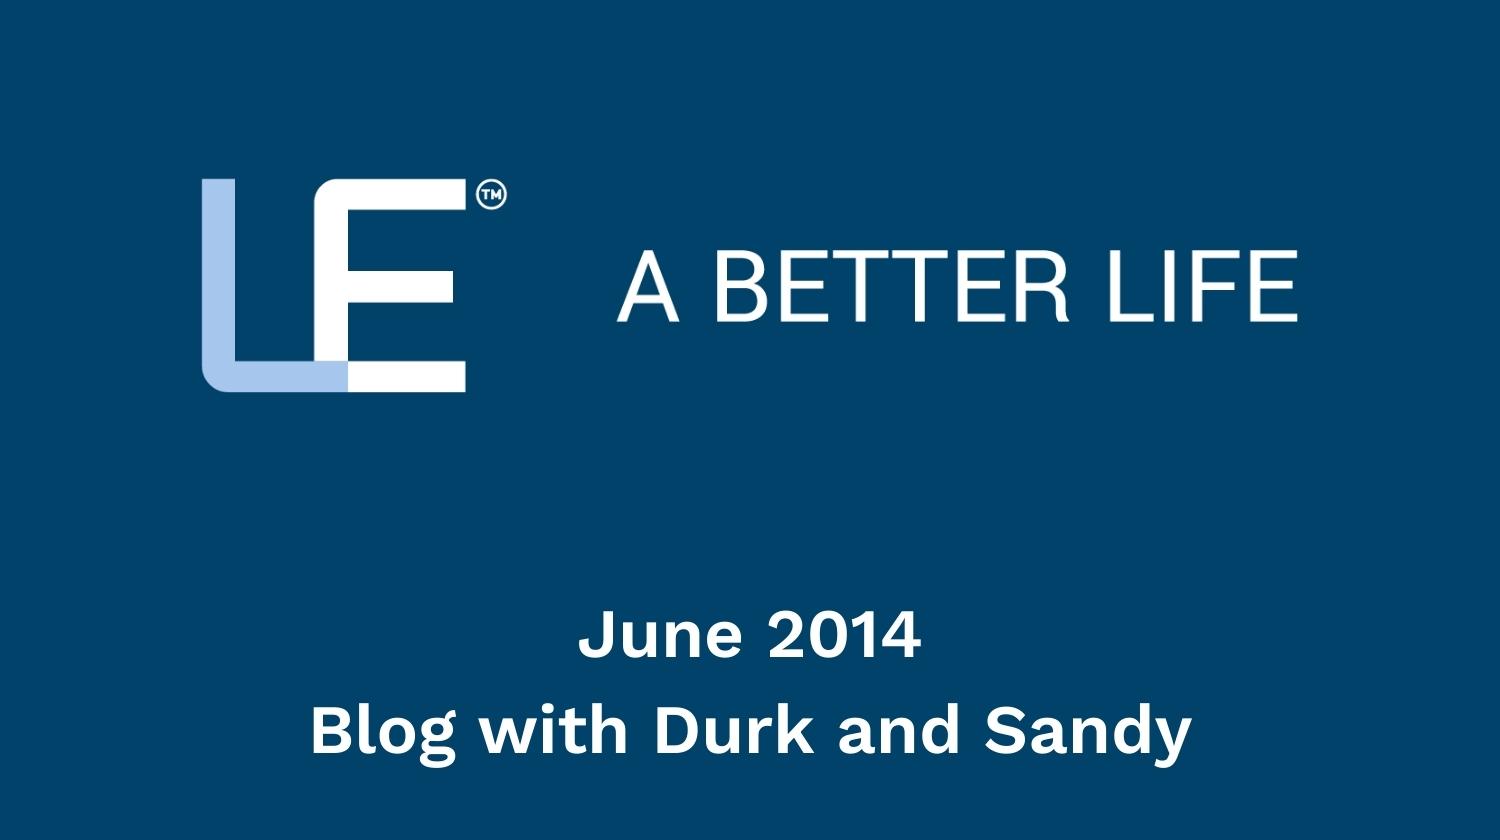 June 2014 Blog with Durk and Sandy